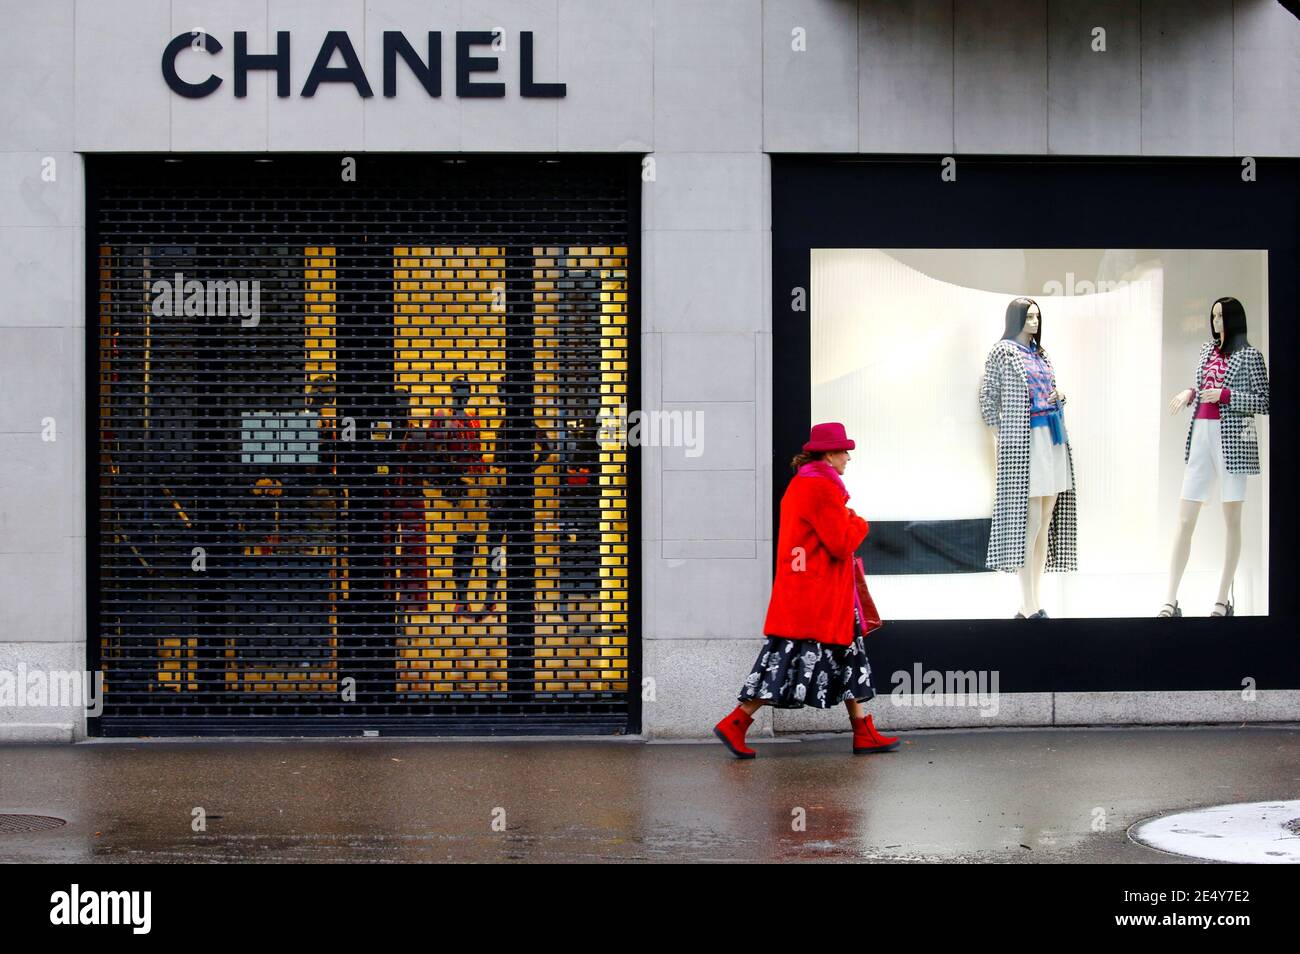 Chanel Store Zurich High Resolution Stock Photography and Images - Alamy